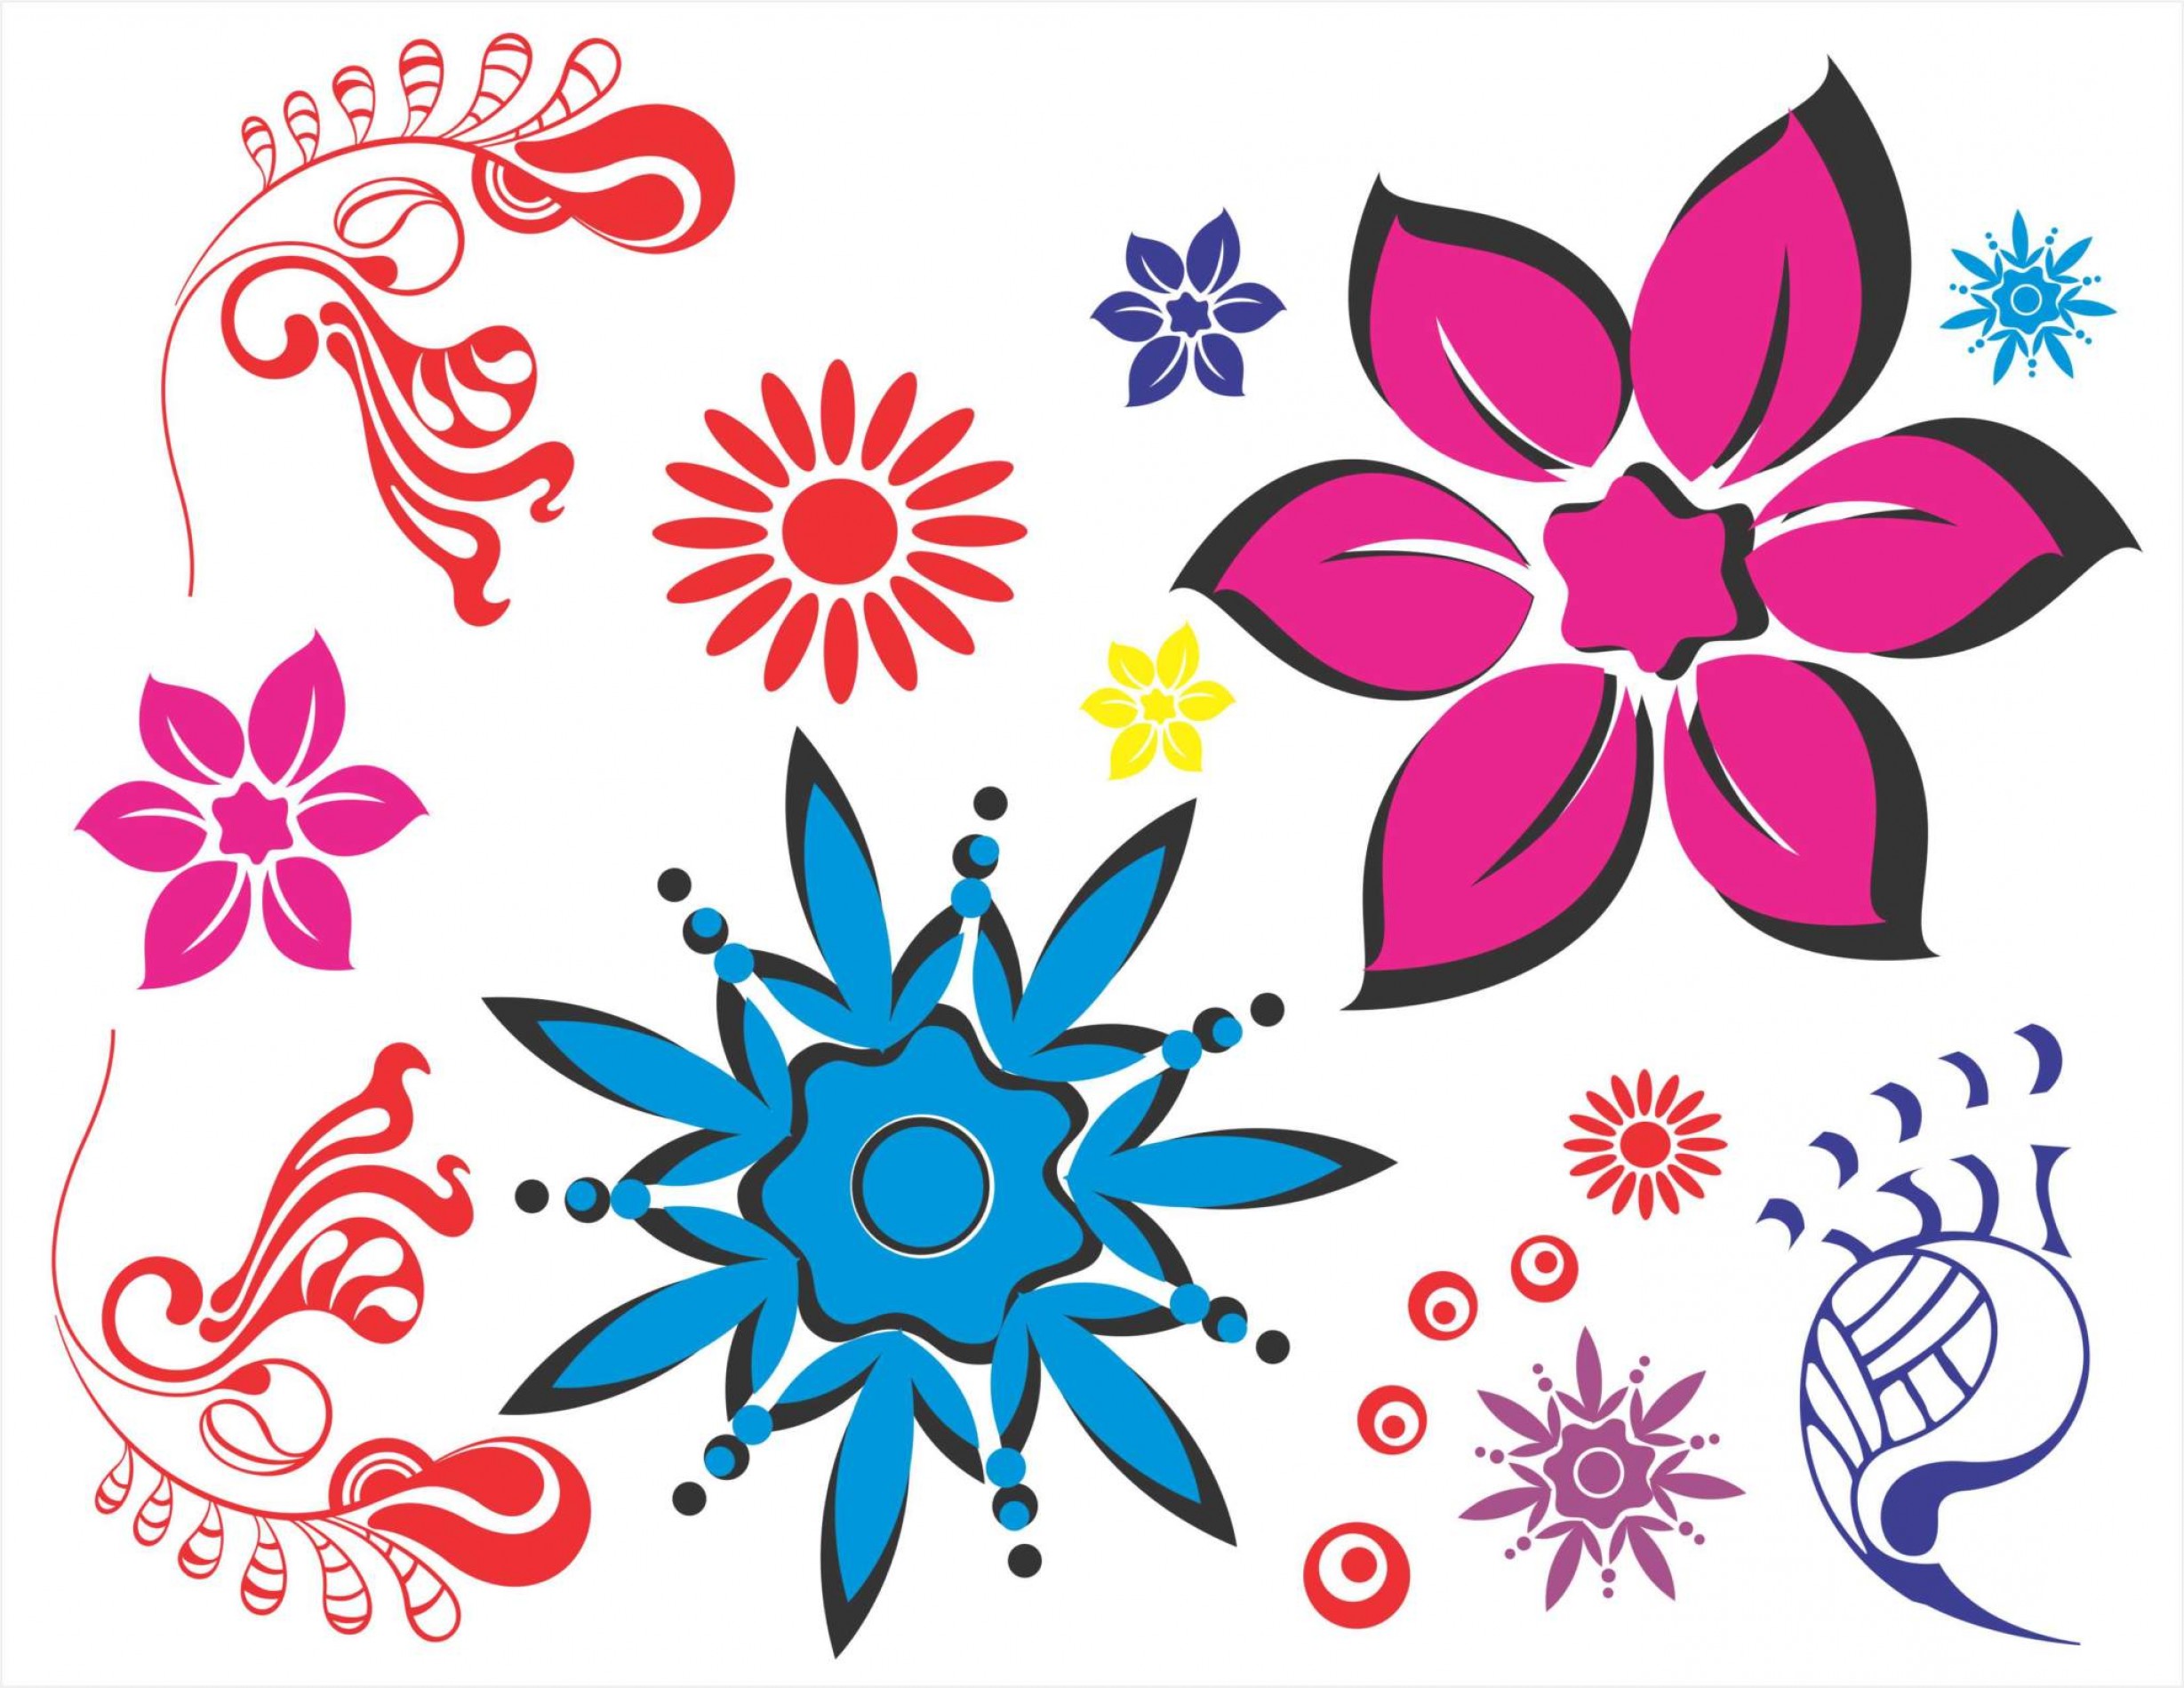 Floral pattern vector.